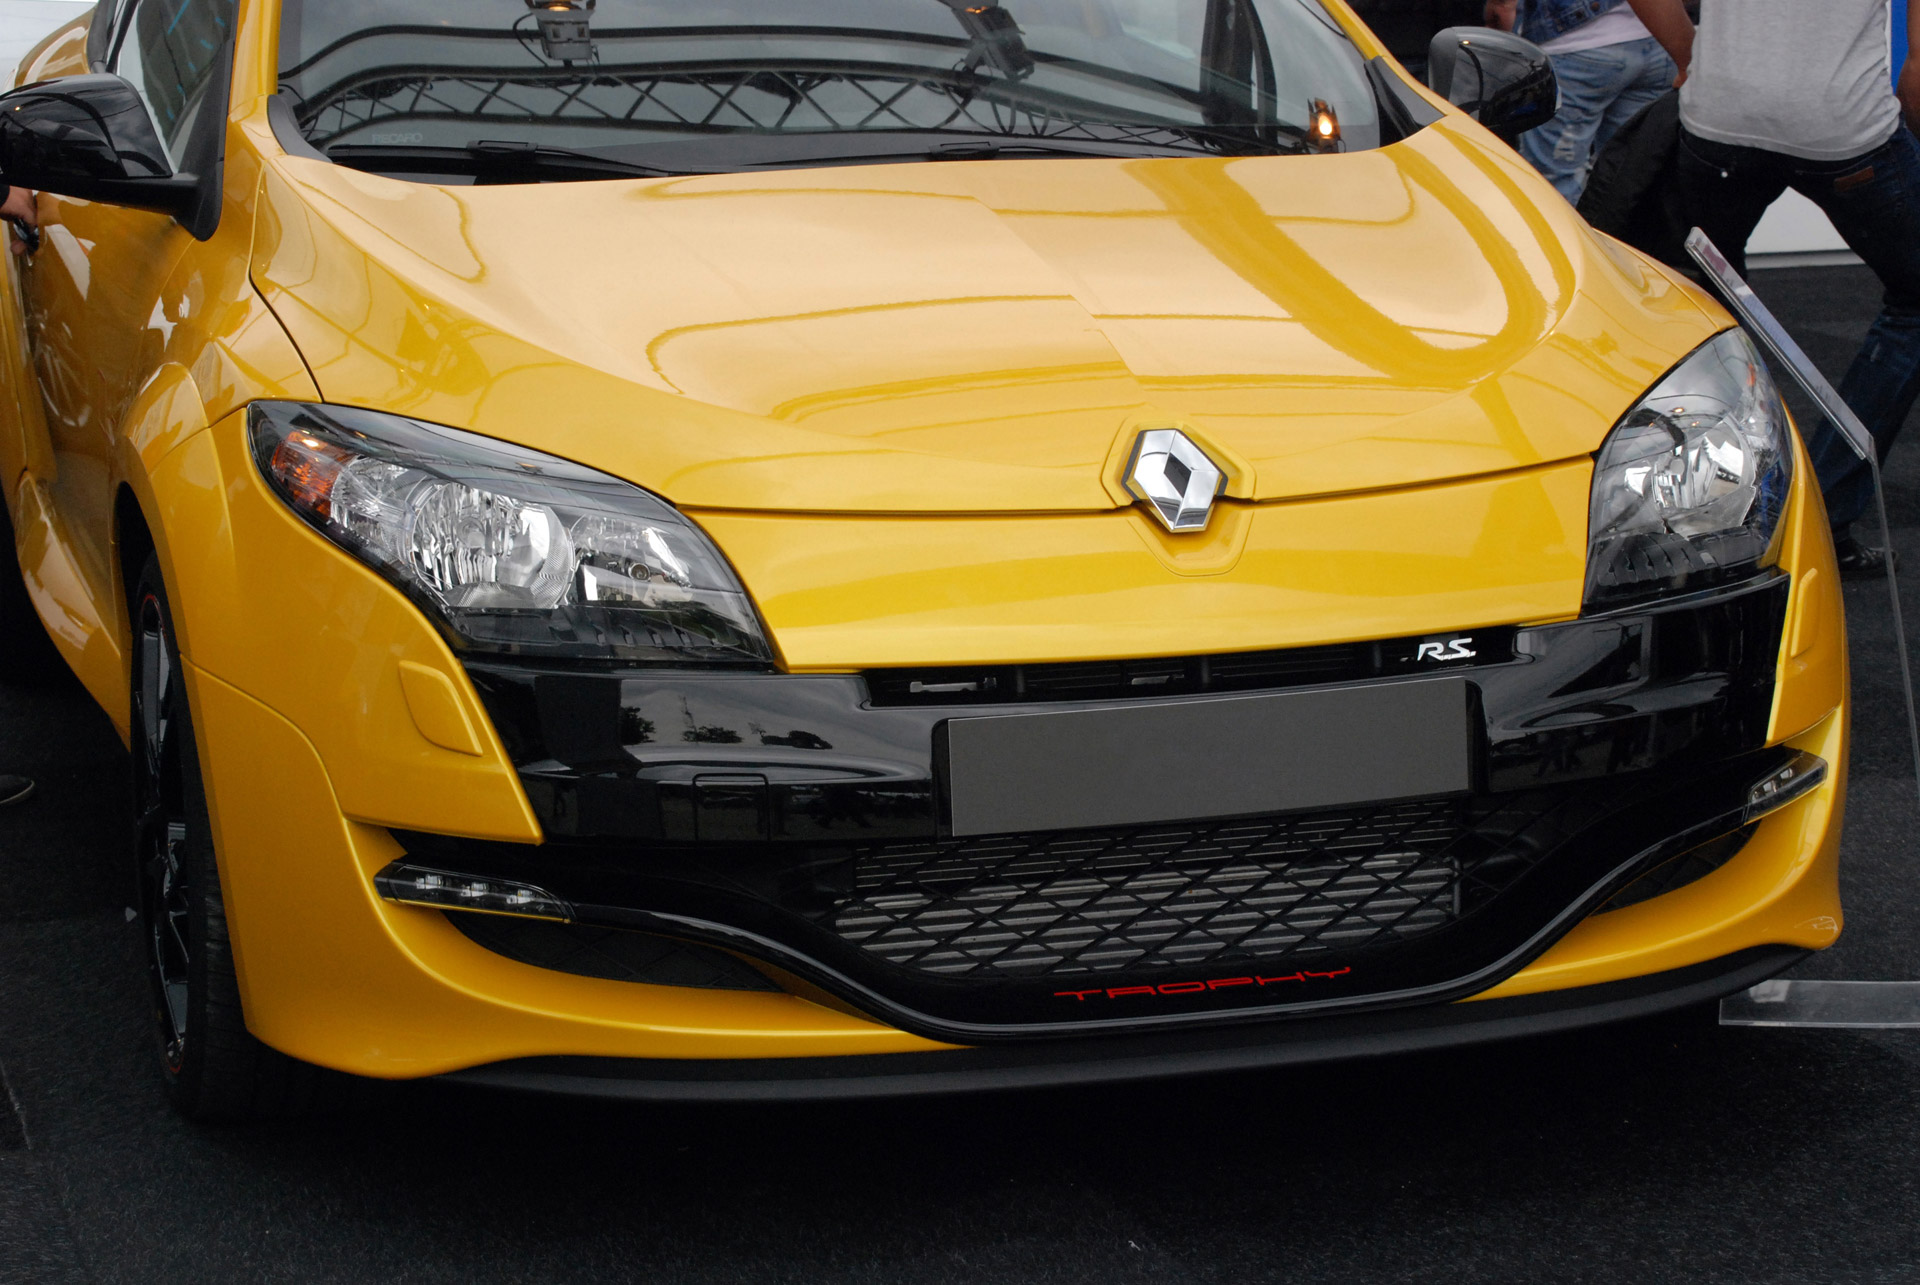 Detailed shot of a sports car front